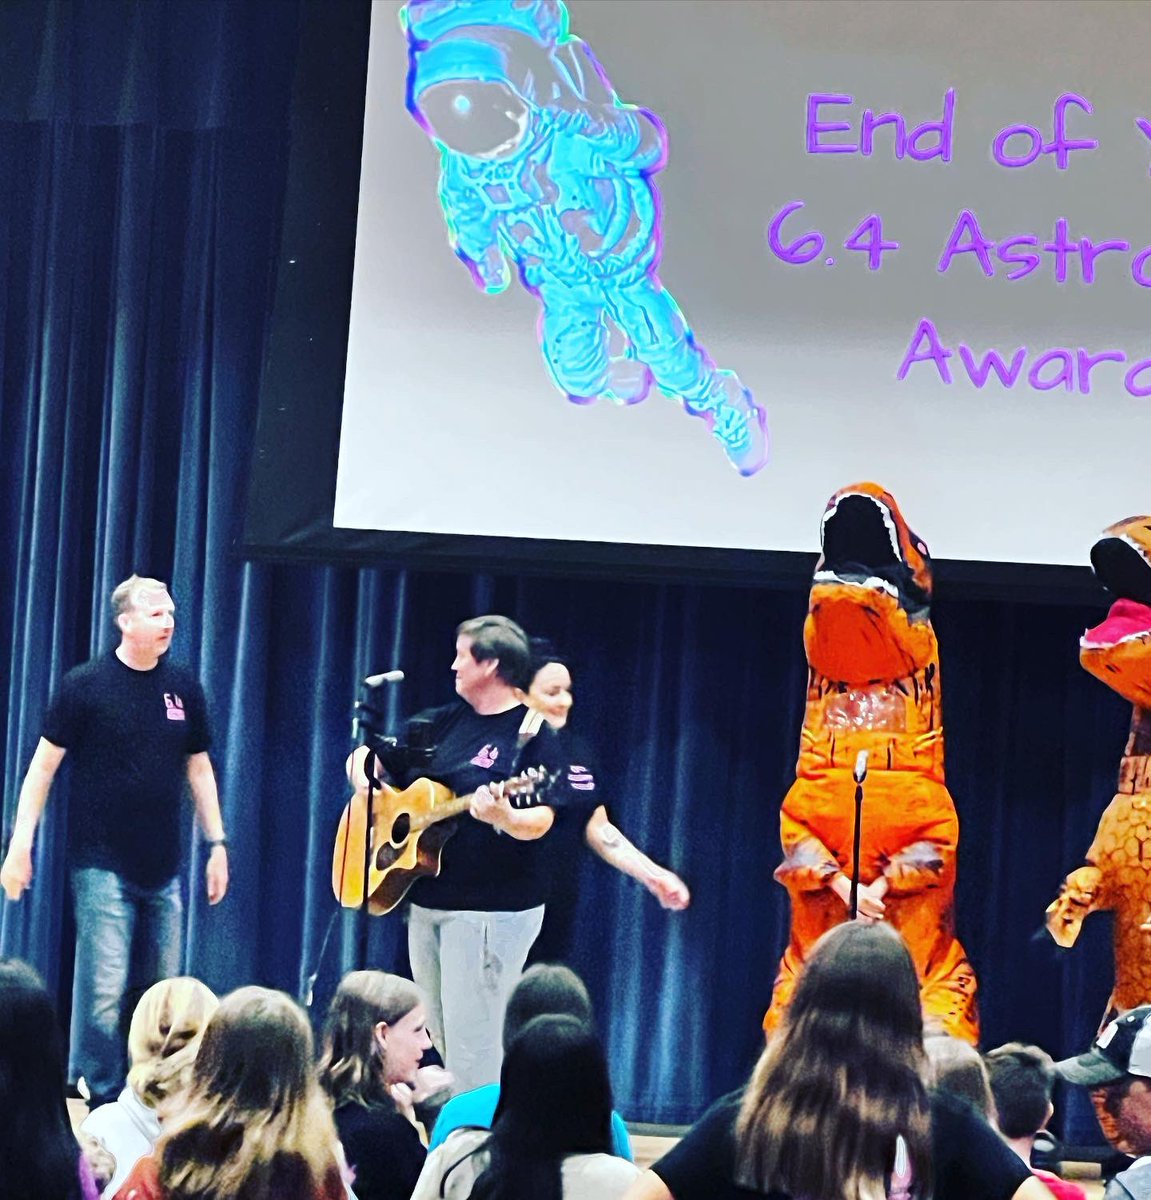 It’s impossible not to marvel at the fusion of electric guitar sounds and dancing T-Rex's marking the end of the year @SalemMSWake 6-4 🎸🦖! What an incredible 6th-grade year, lead by an exceptionally creative and passionate group of educators! #wcpss #fromhereanythingispossible